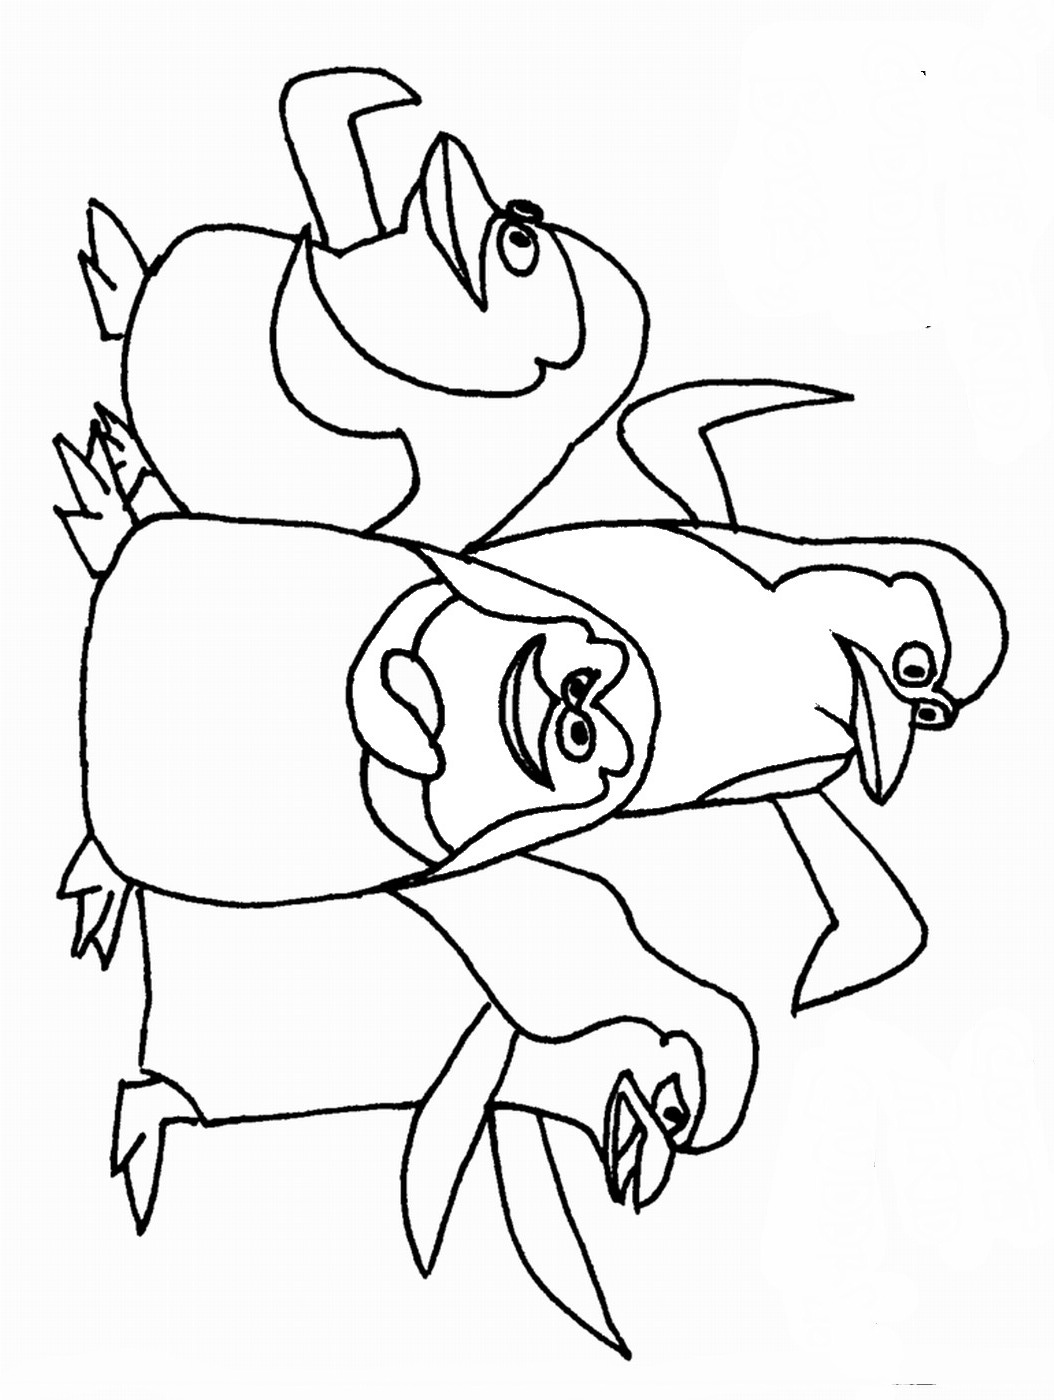 Penguins Of Madagascar Coloring Pages Coloring Pages